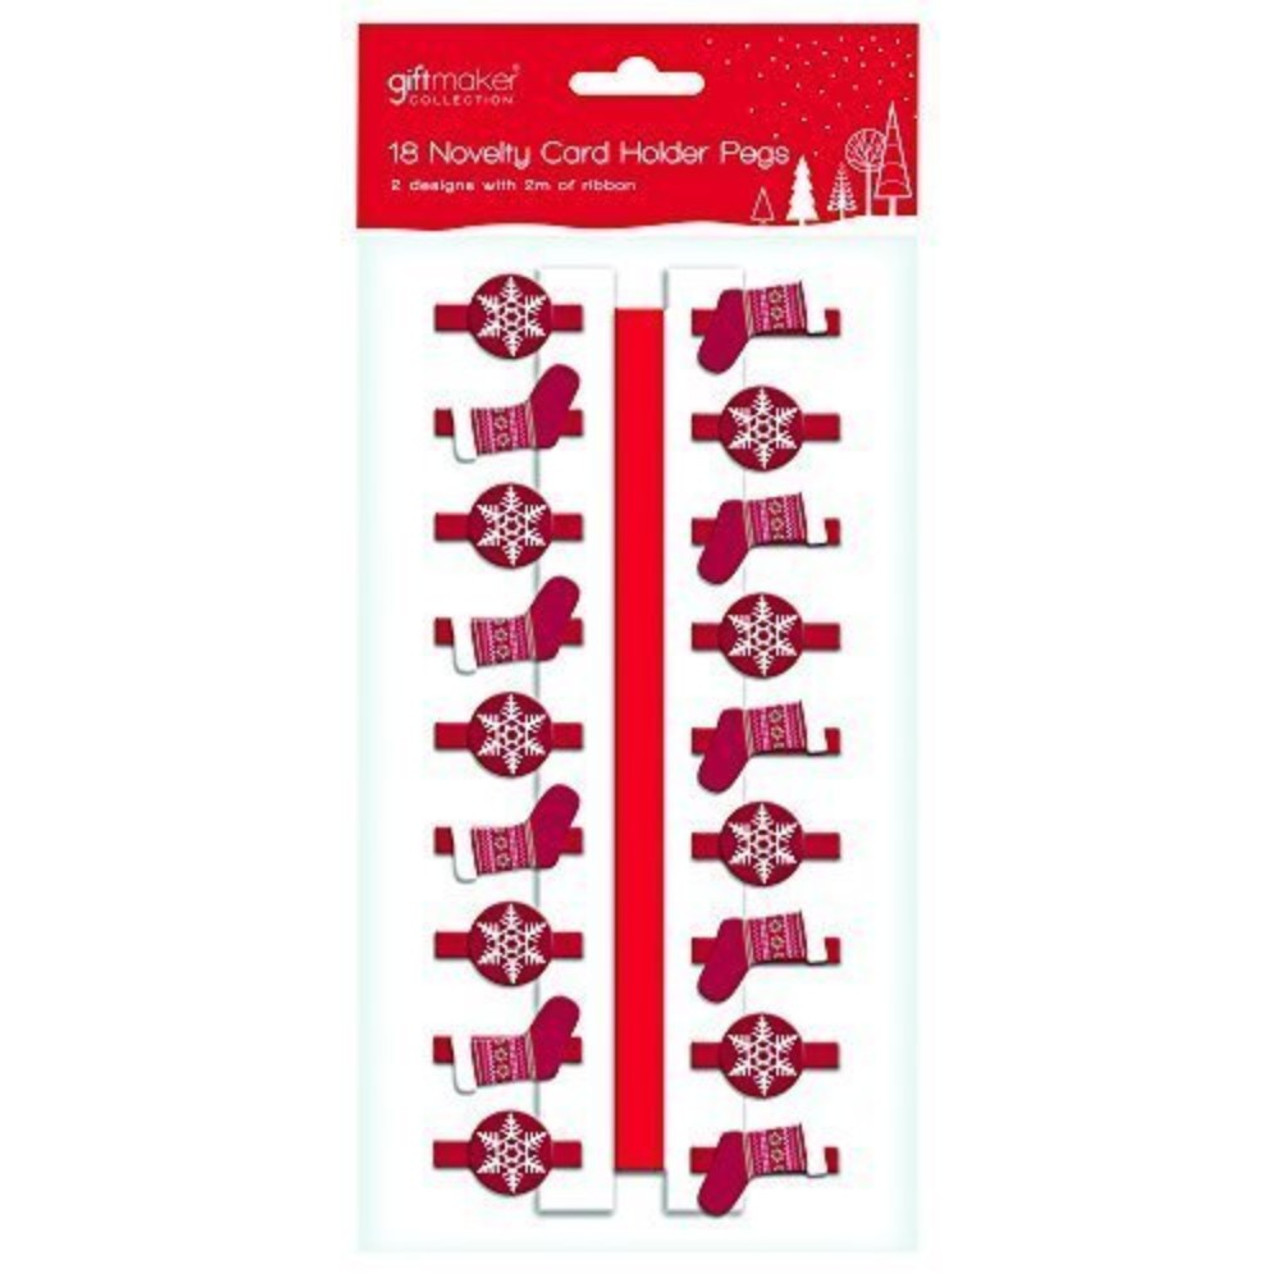 18 x Wooden Novelty Red Snowflake & Stocking Christmas Card Holder Pegs & 2 Metres of Ribbon 